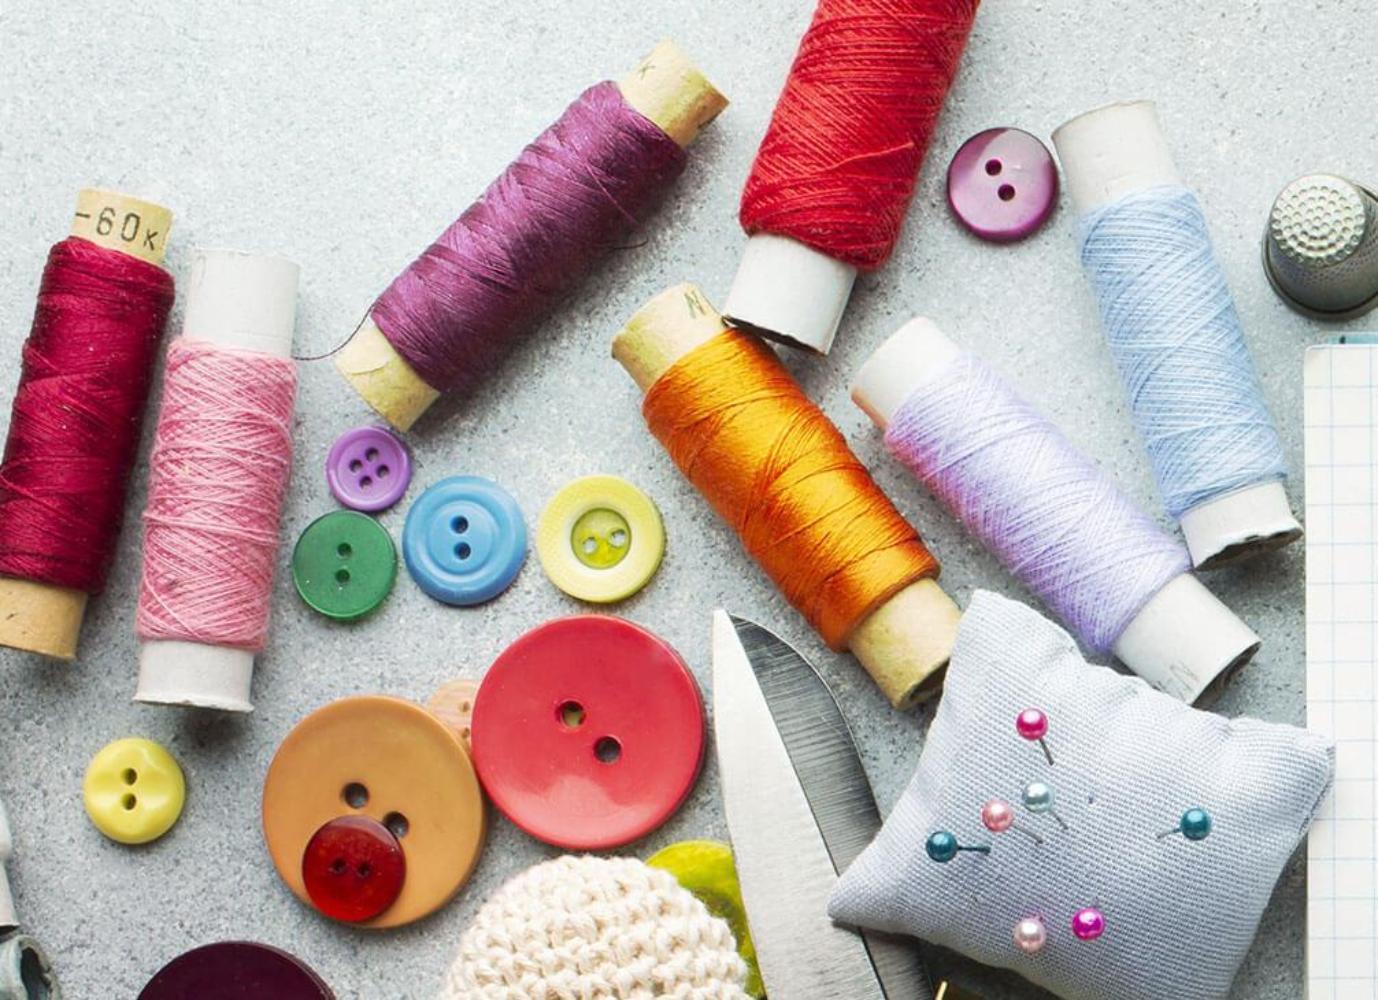 spools of thread, tape measure, scissors, a note pad, buttons and a pin cushion spread out on a white surface.